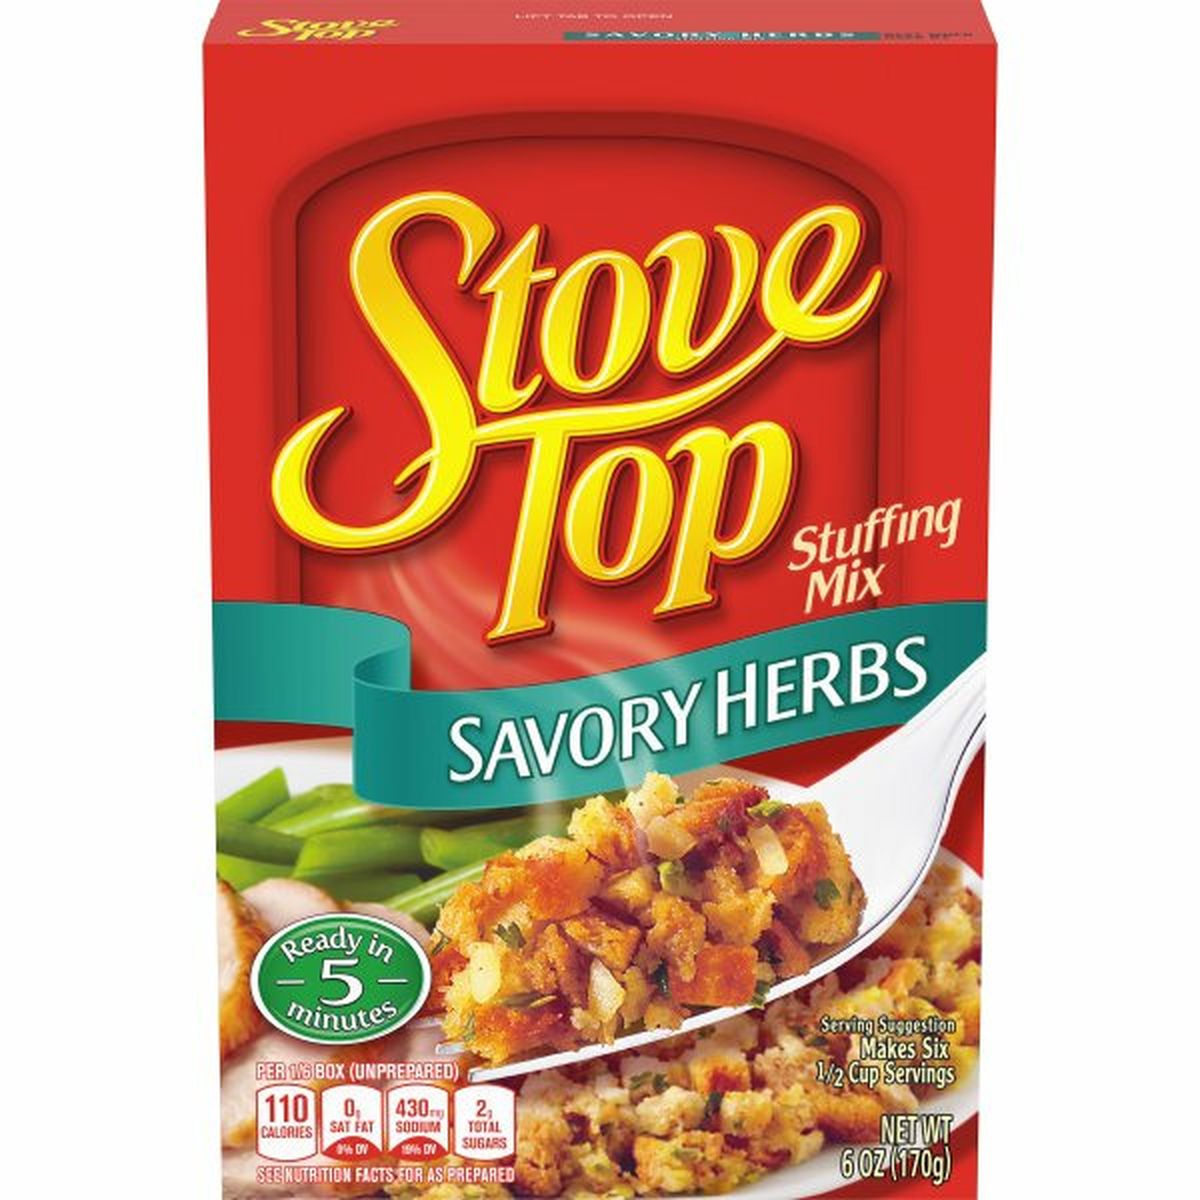 Calories in Kraft Stove Top Savory Herbs Stuffing Mix